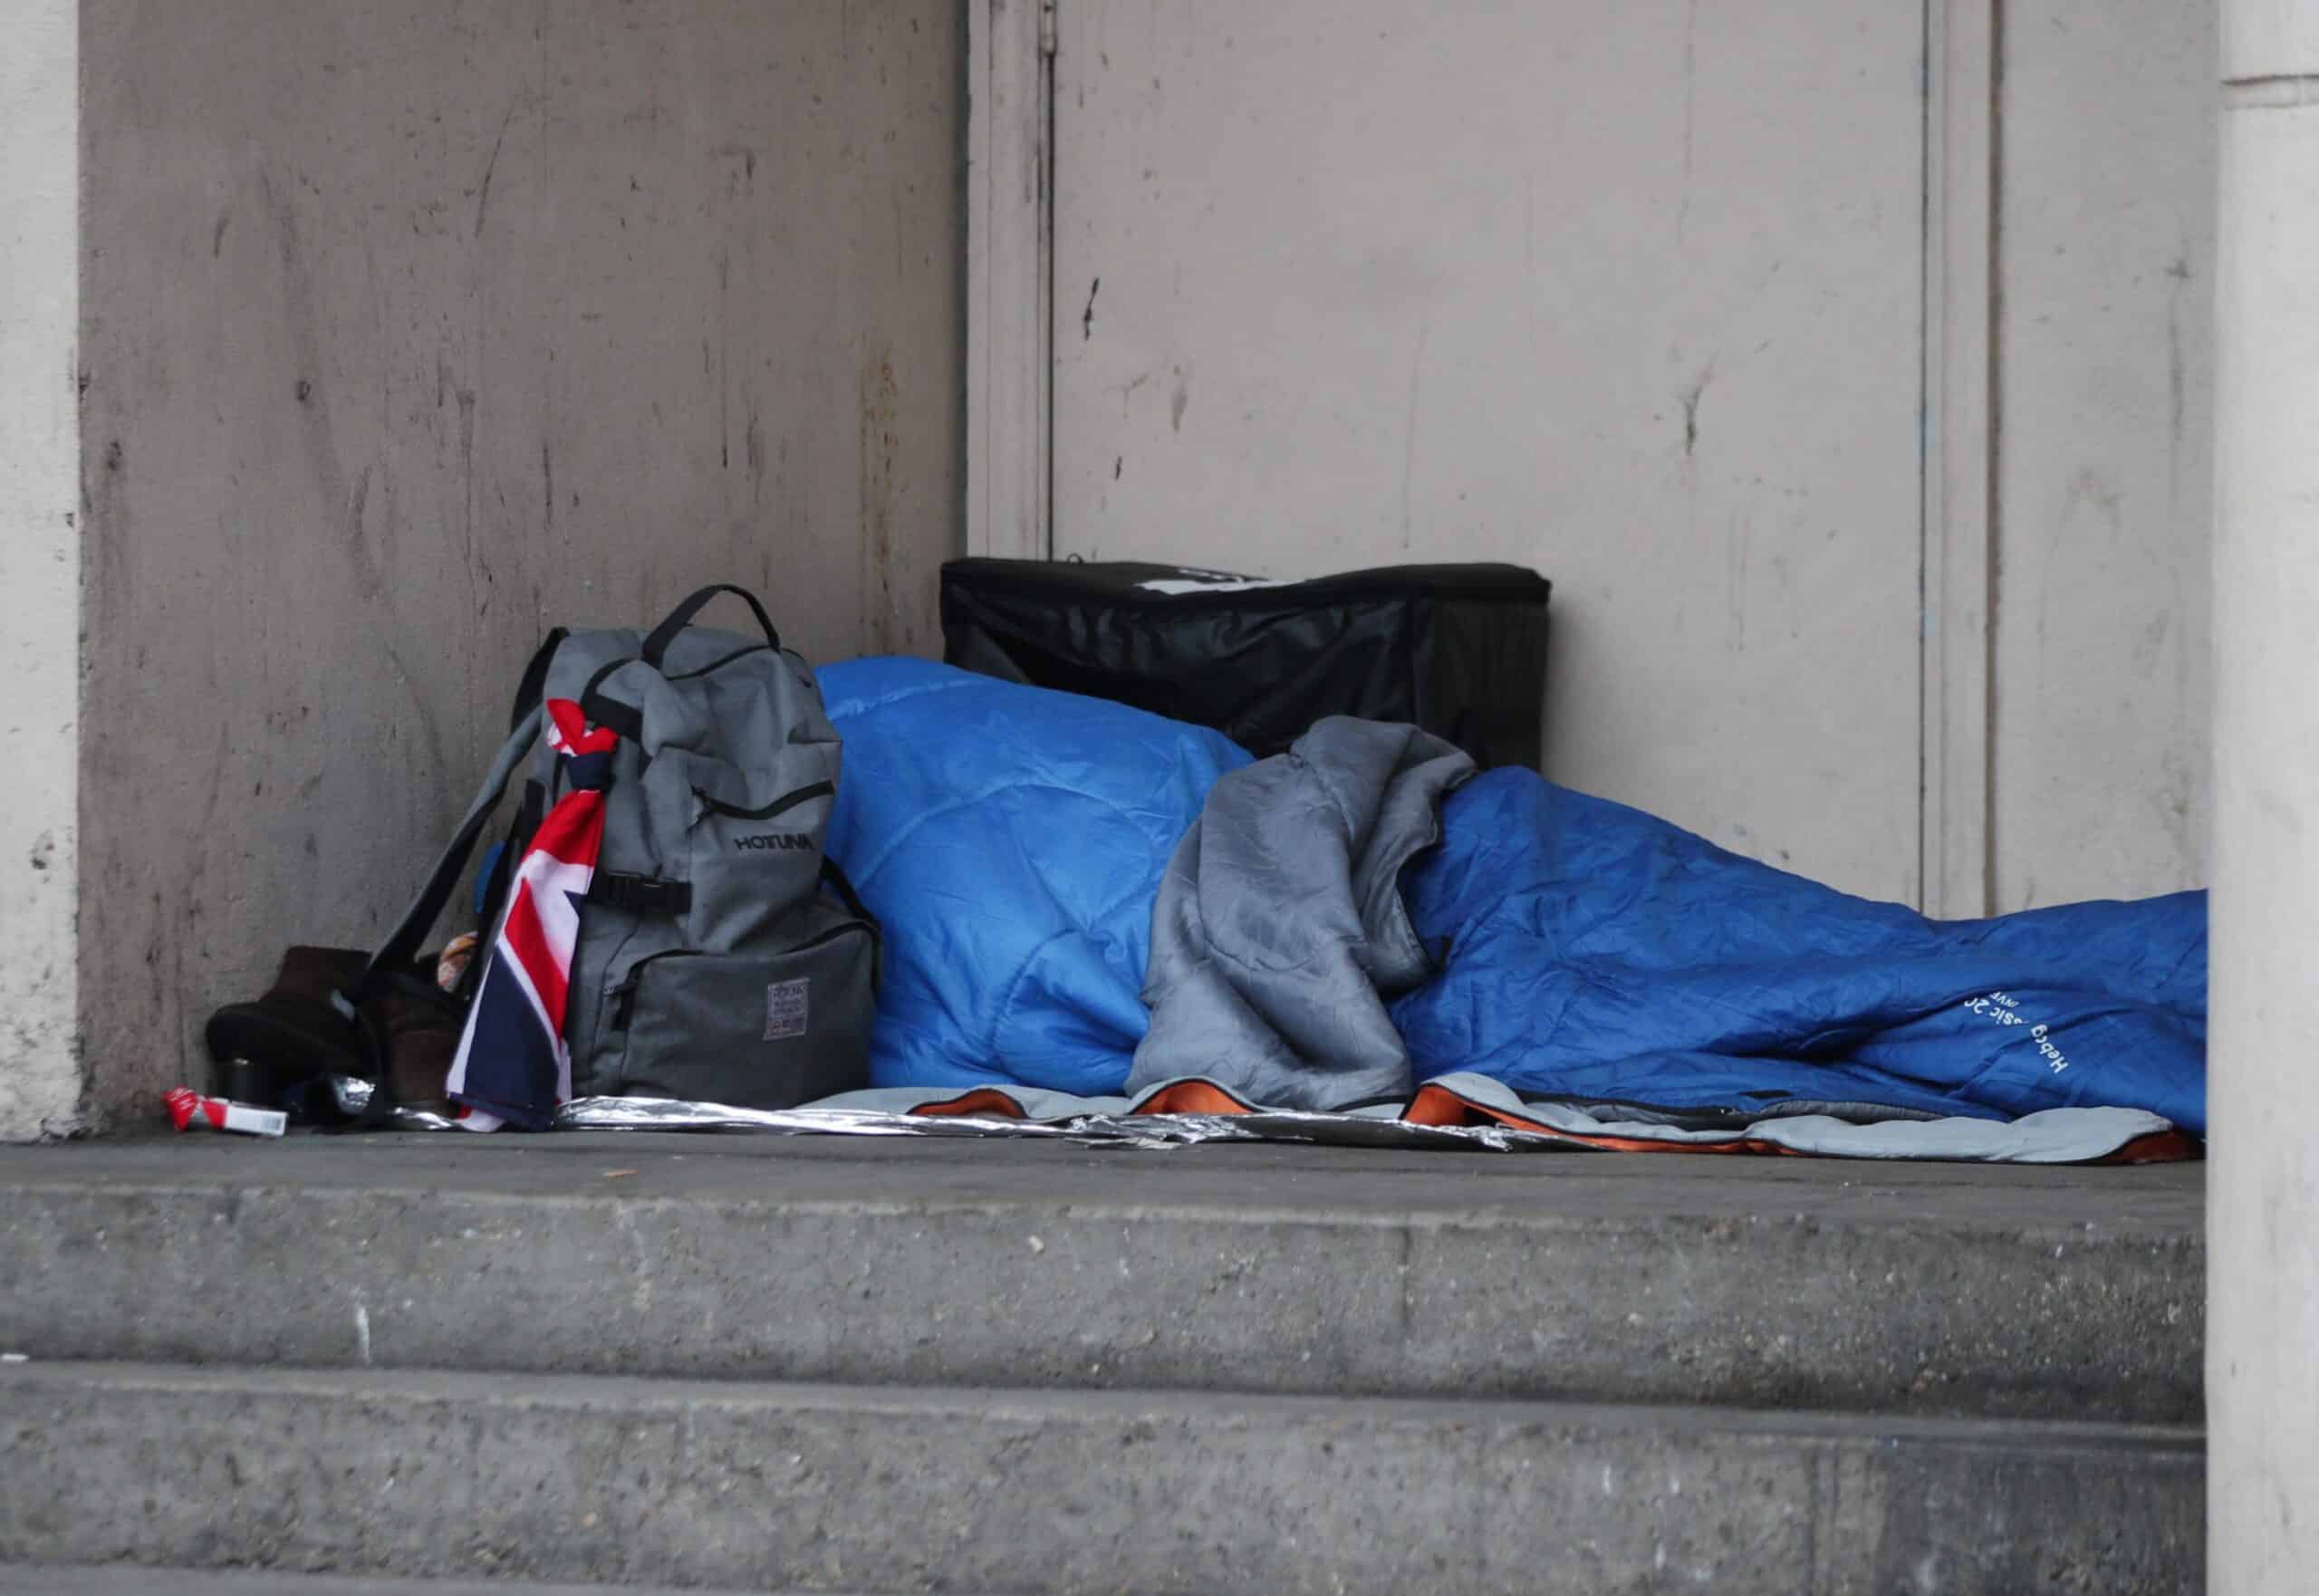 Ministers facing revolt over plans to criminalise rough sleeping